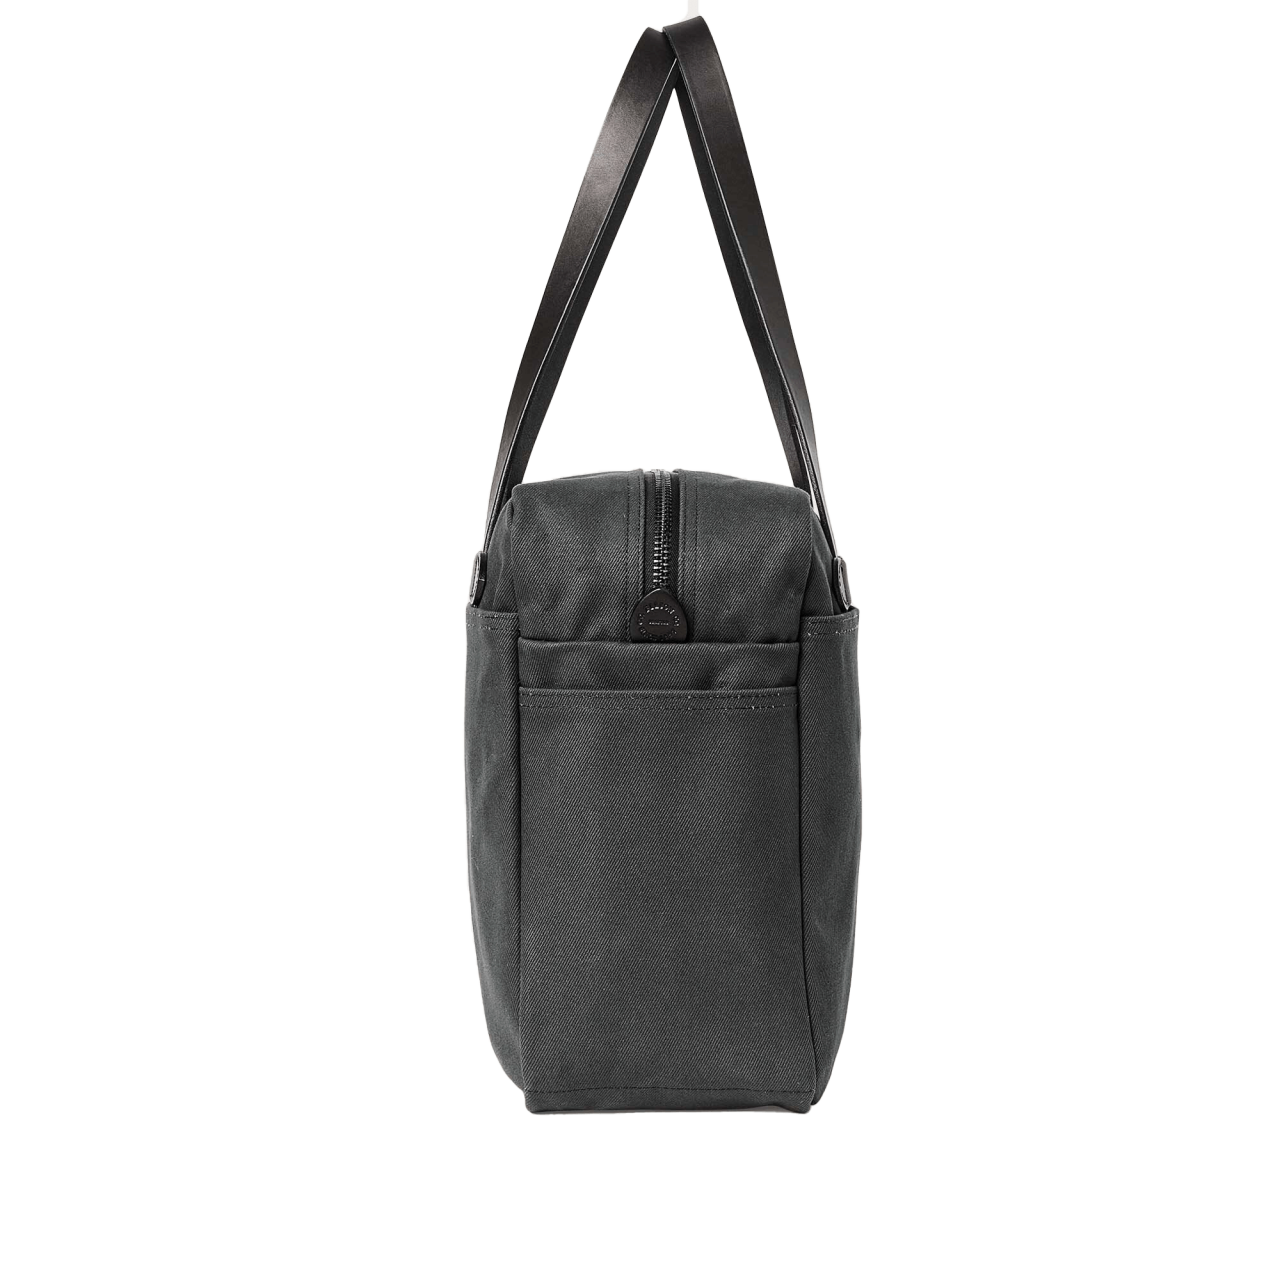 Filson Rugged Twill Tote Bag with Zipper - faded black